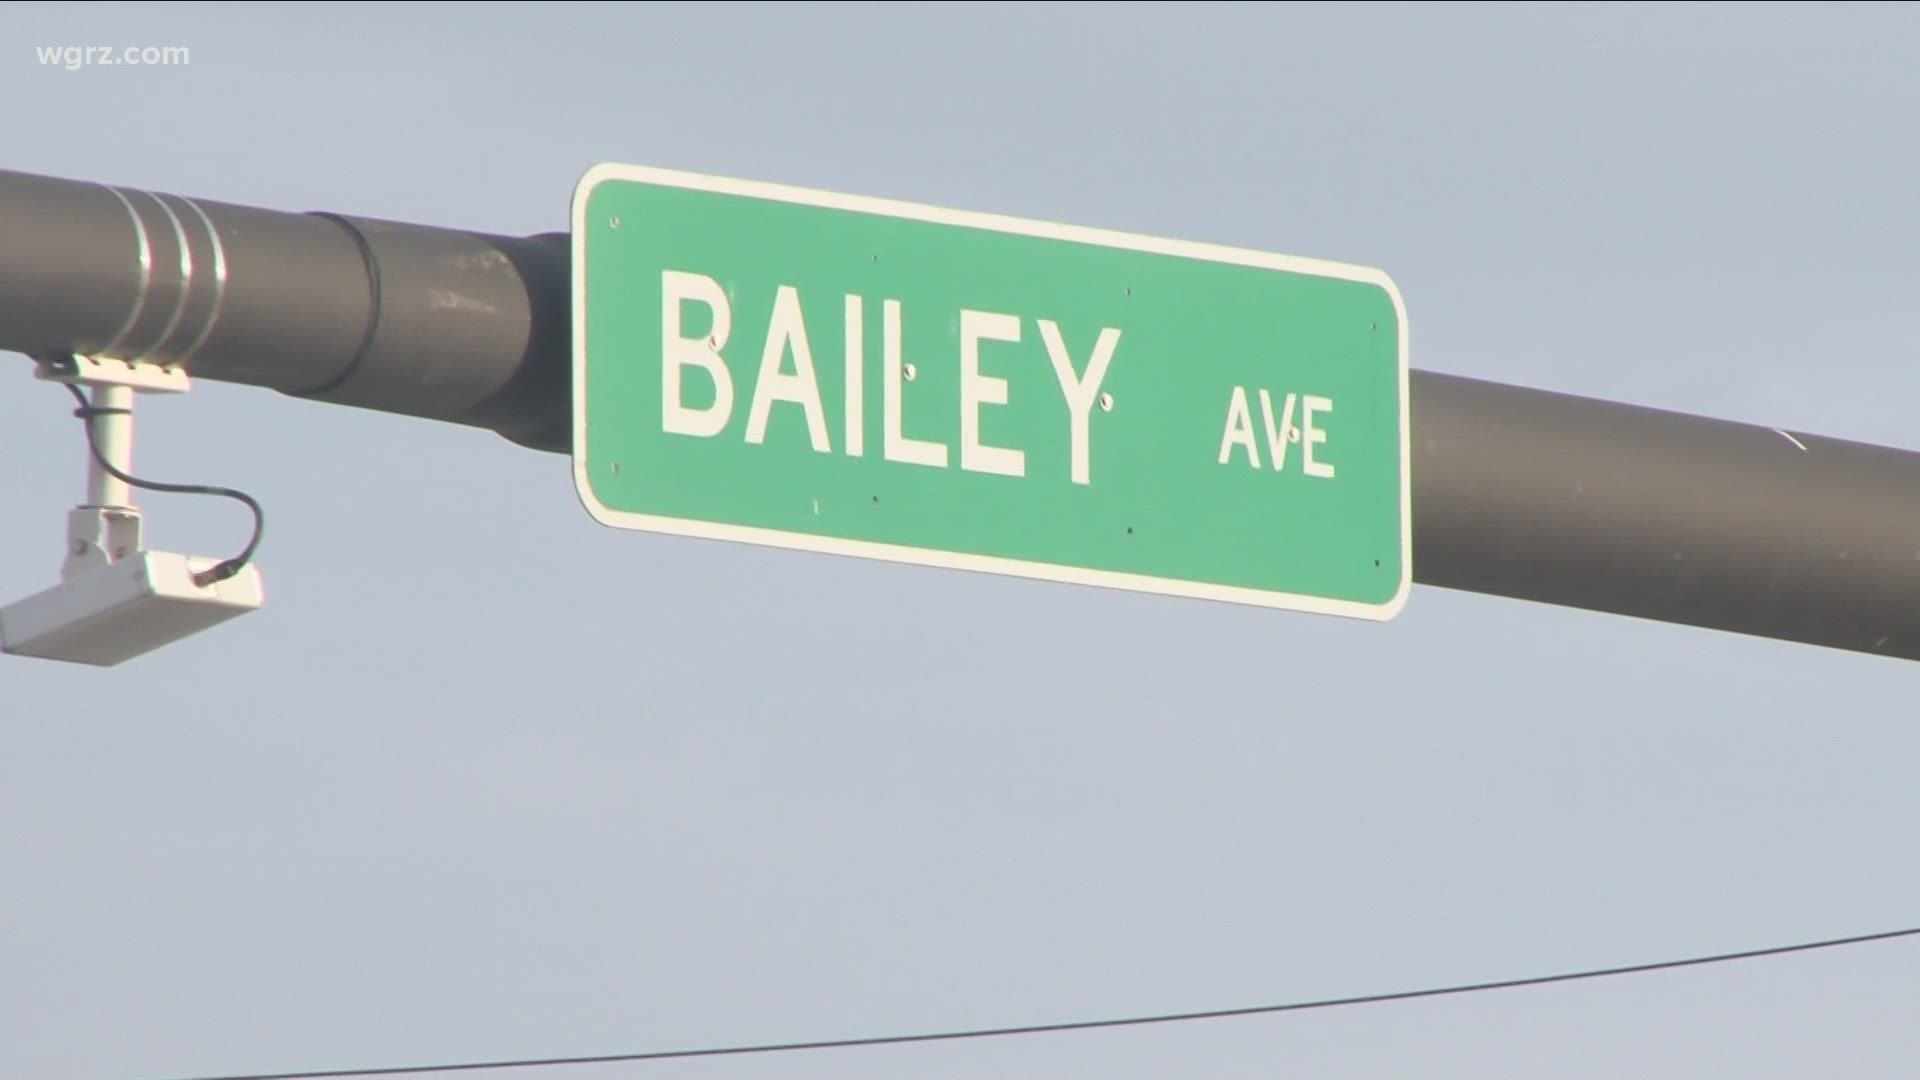 Buffalo police are investigating a shooting that happened Saturday night. Officers responded to the call around 10:40 last night near Bailey Avenue and Broadway.